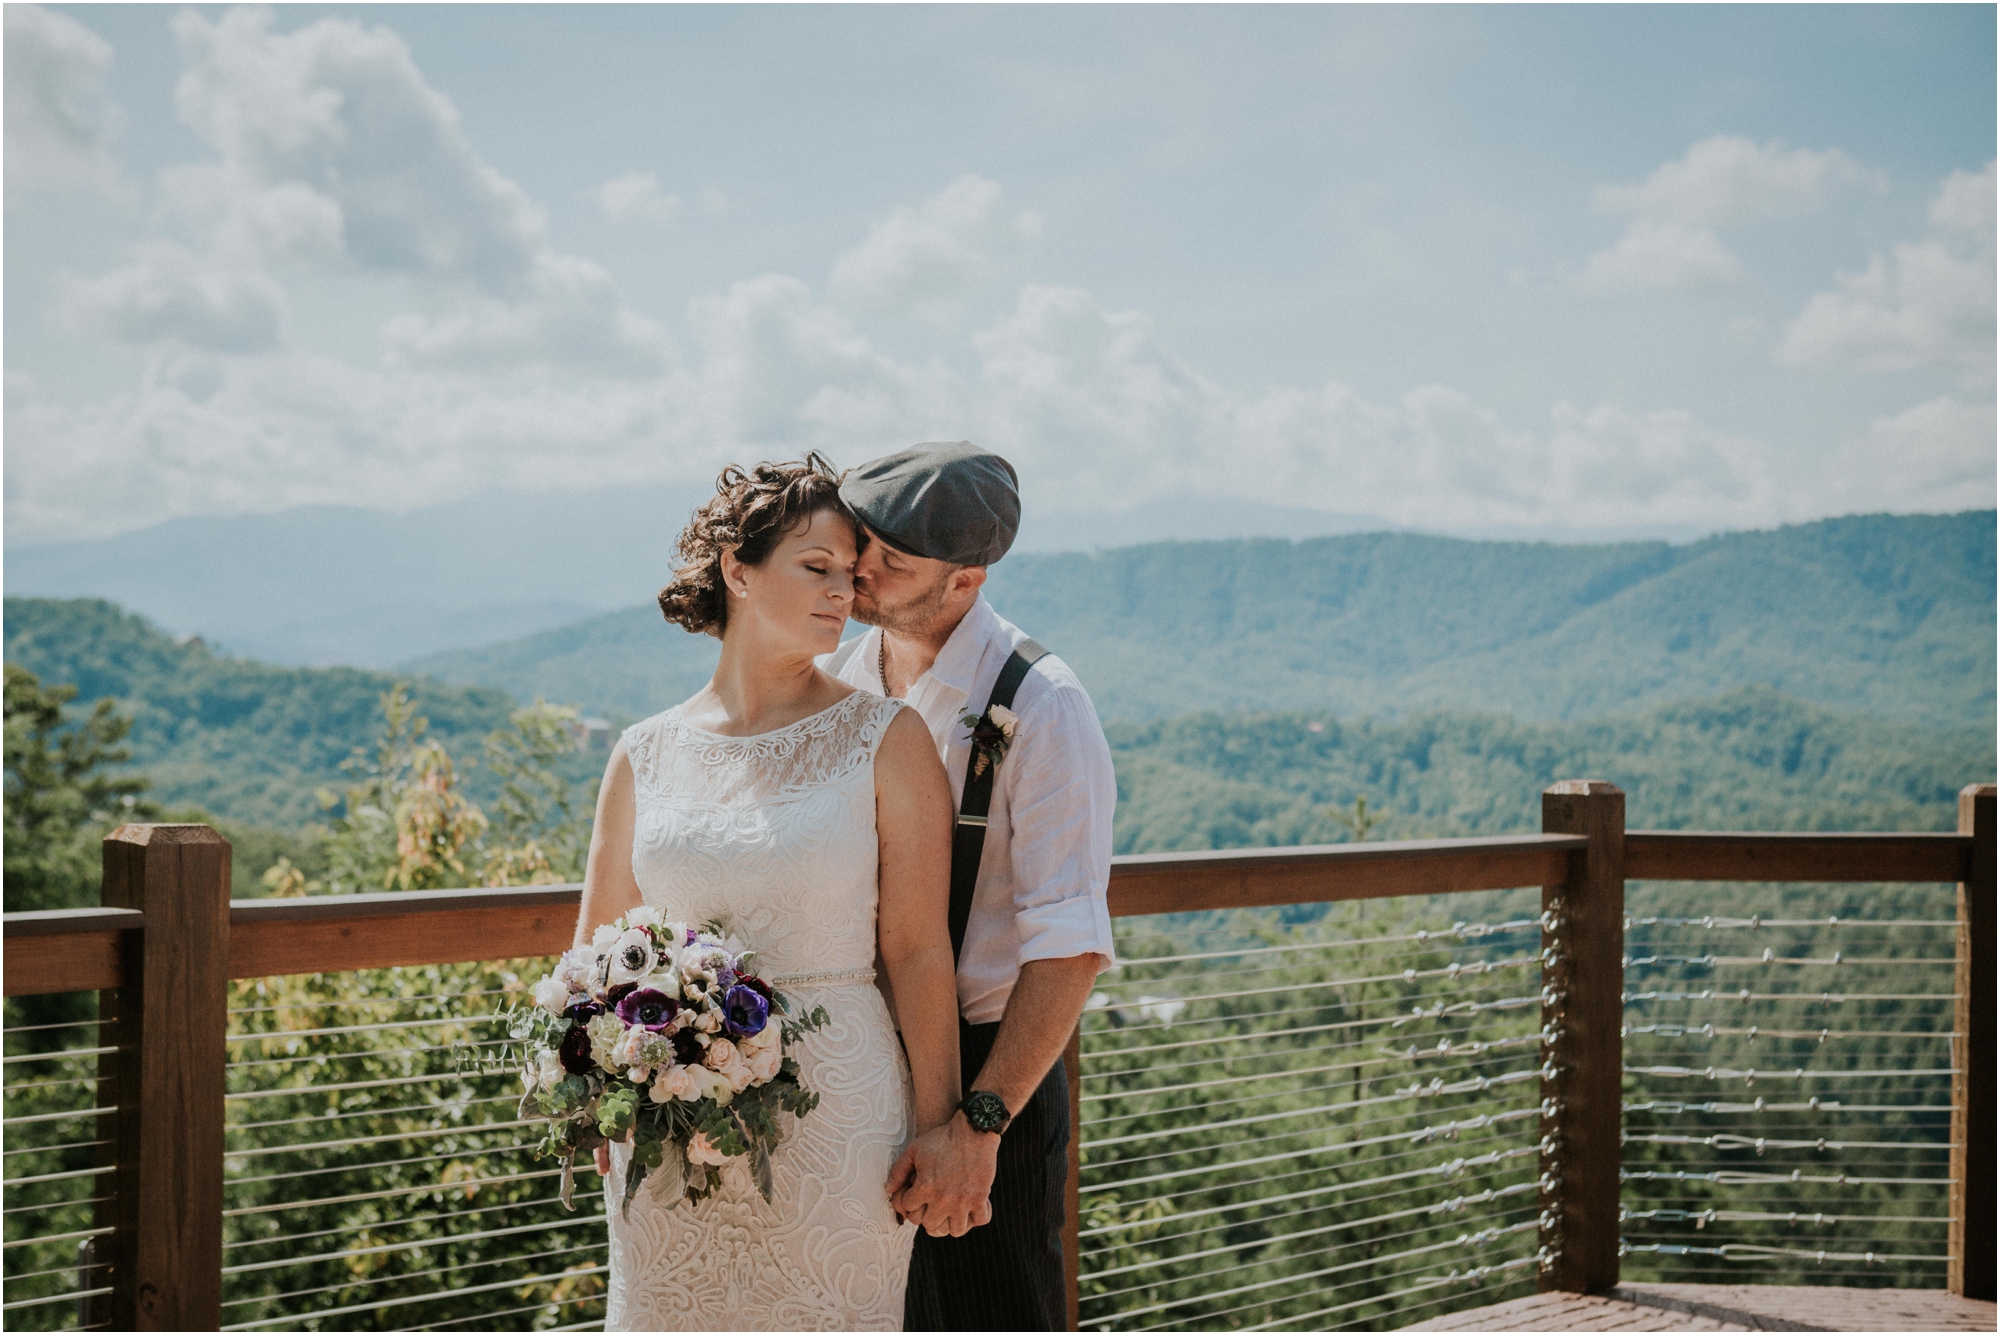 cabin-parkside-resort-the-magnolia-venue-tennessee-mountain-views-intimate-wedding_0110.jpg